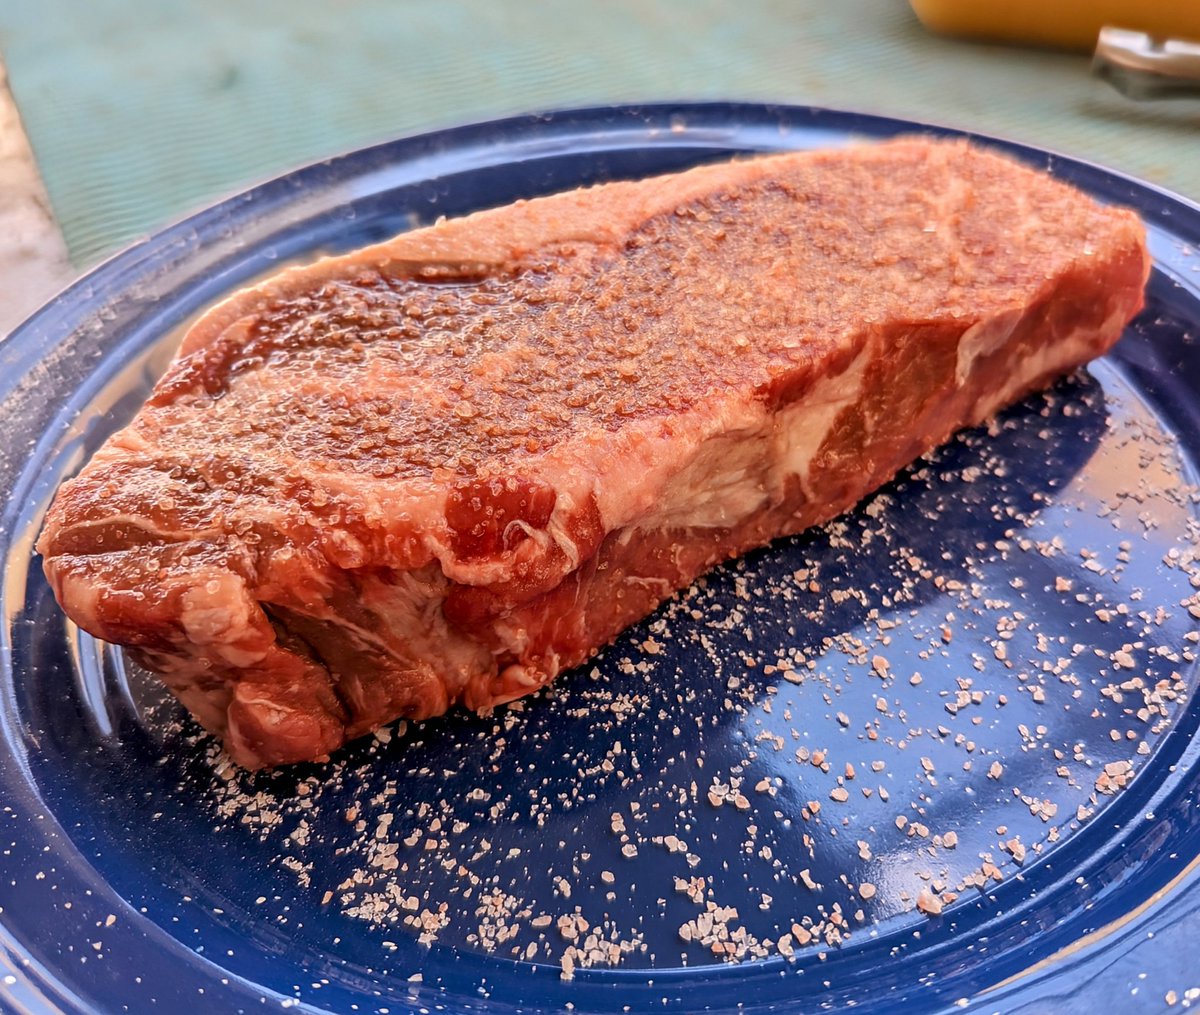 Do you salt your steak before putting it on the grill? 🥩